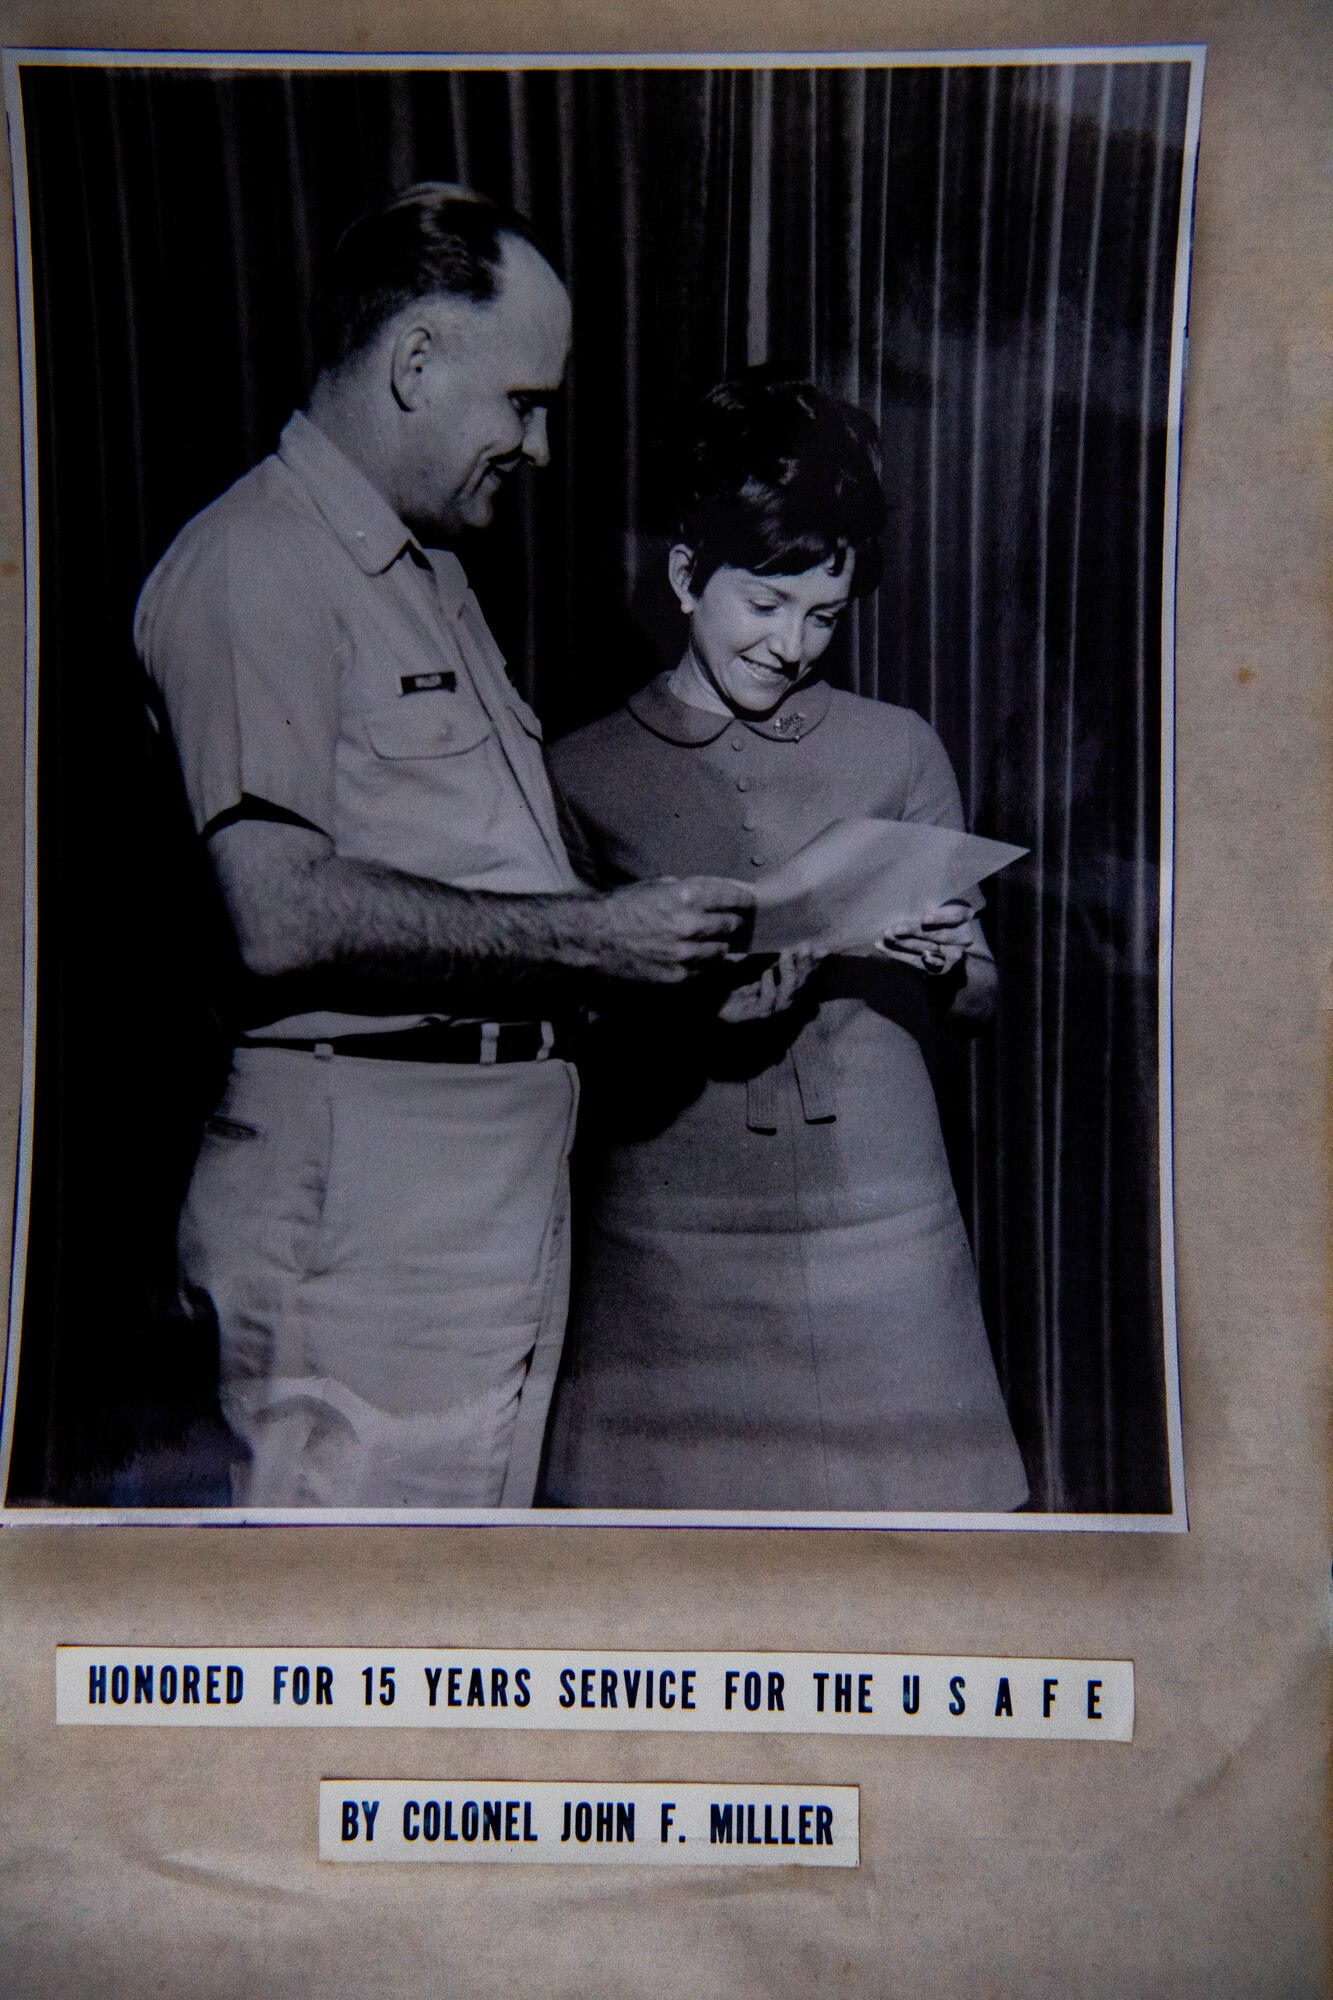 Hilde is presented with an award by Col John F. Miller for 15 years of service in 1969.